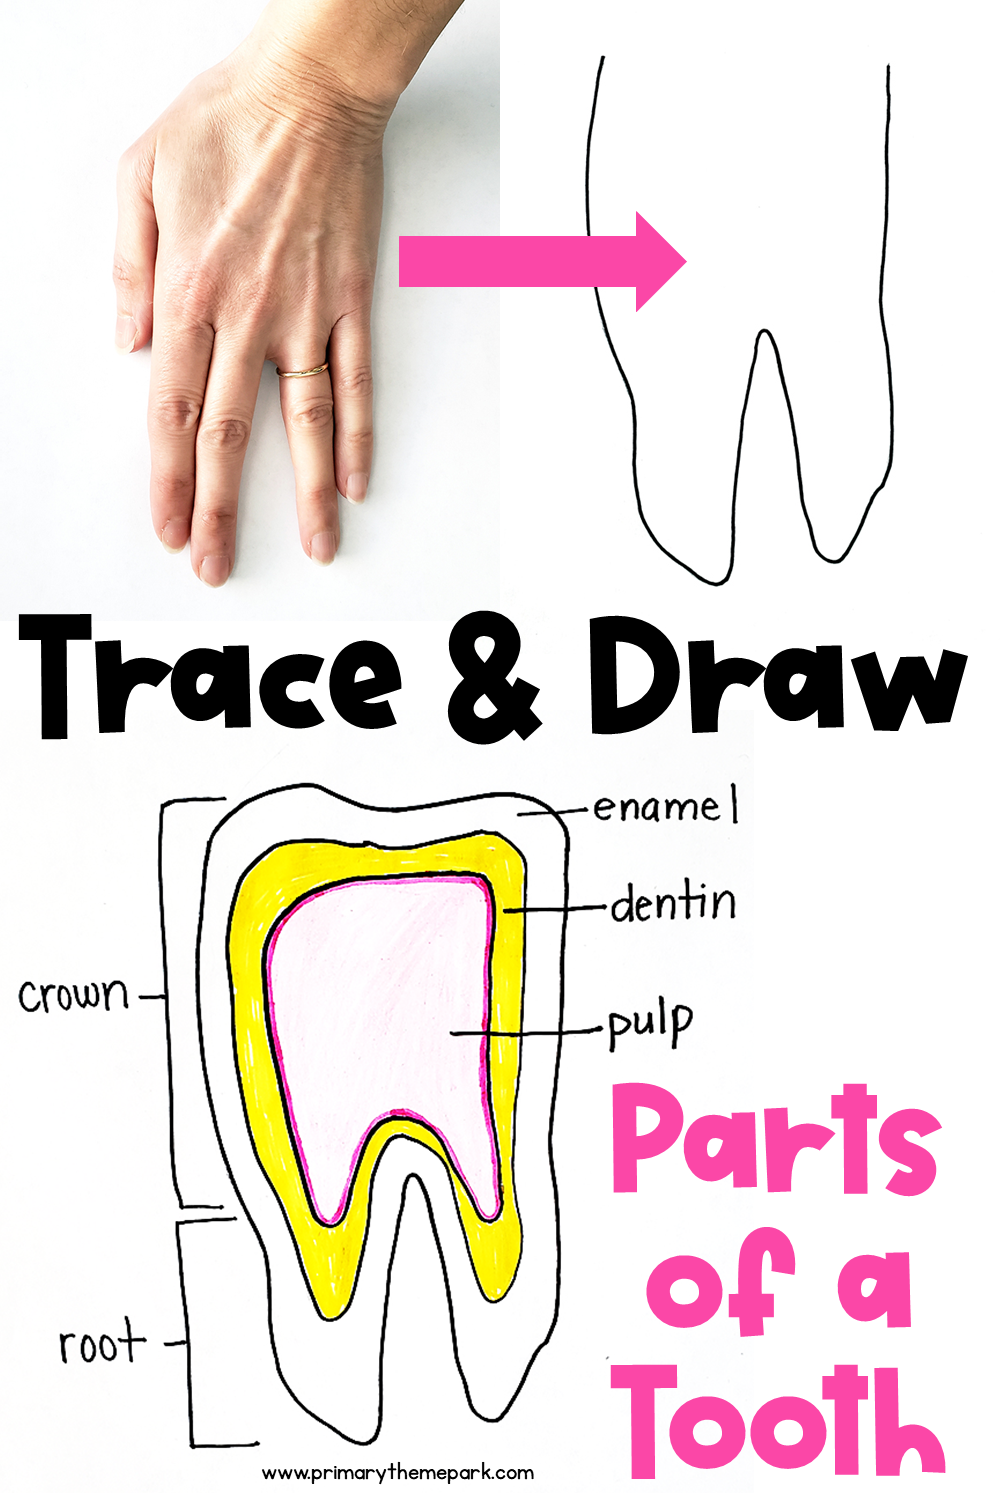 How to Draw a Parts of a Tooth Diagram for Kids. It's as easy as tracing your hand!